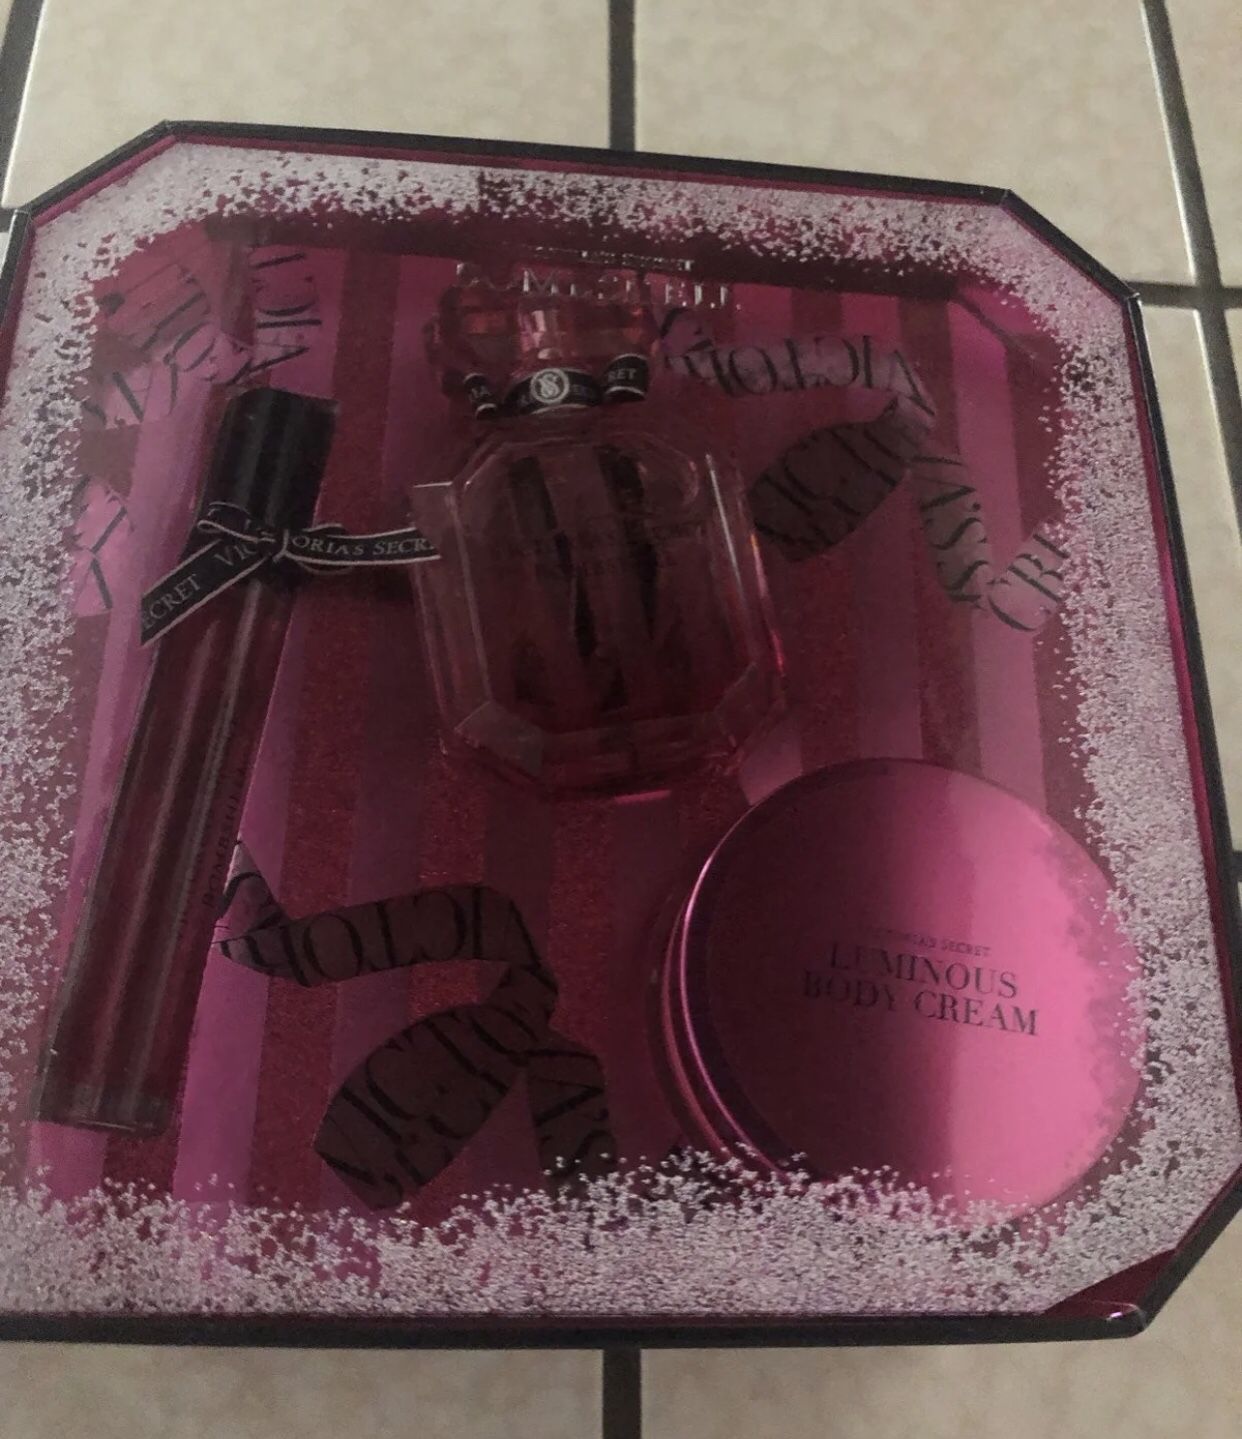 Brands new bombshell perfume set comes with a rollerball, lotion, and 1.7 fl oz perfume ..